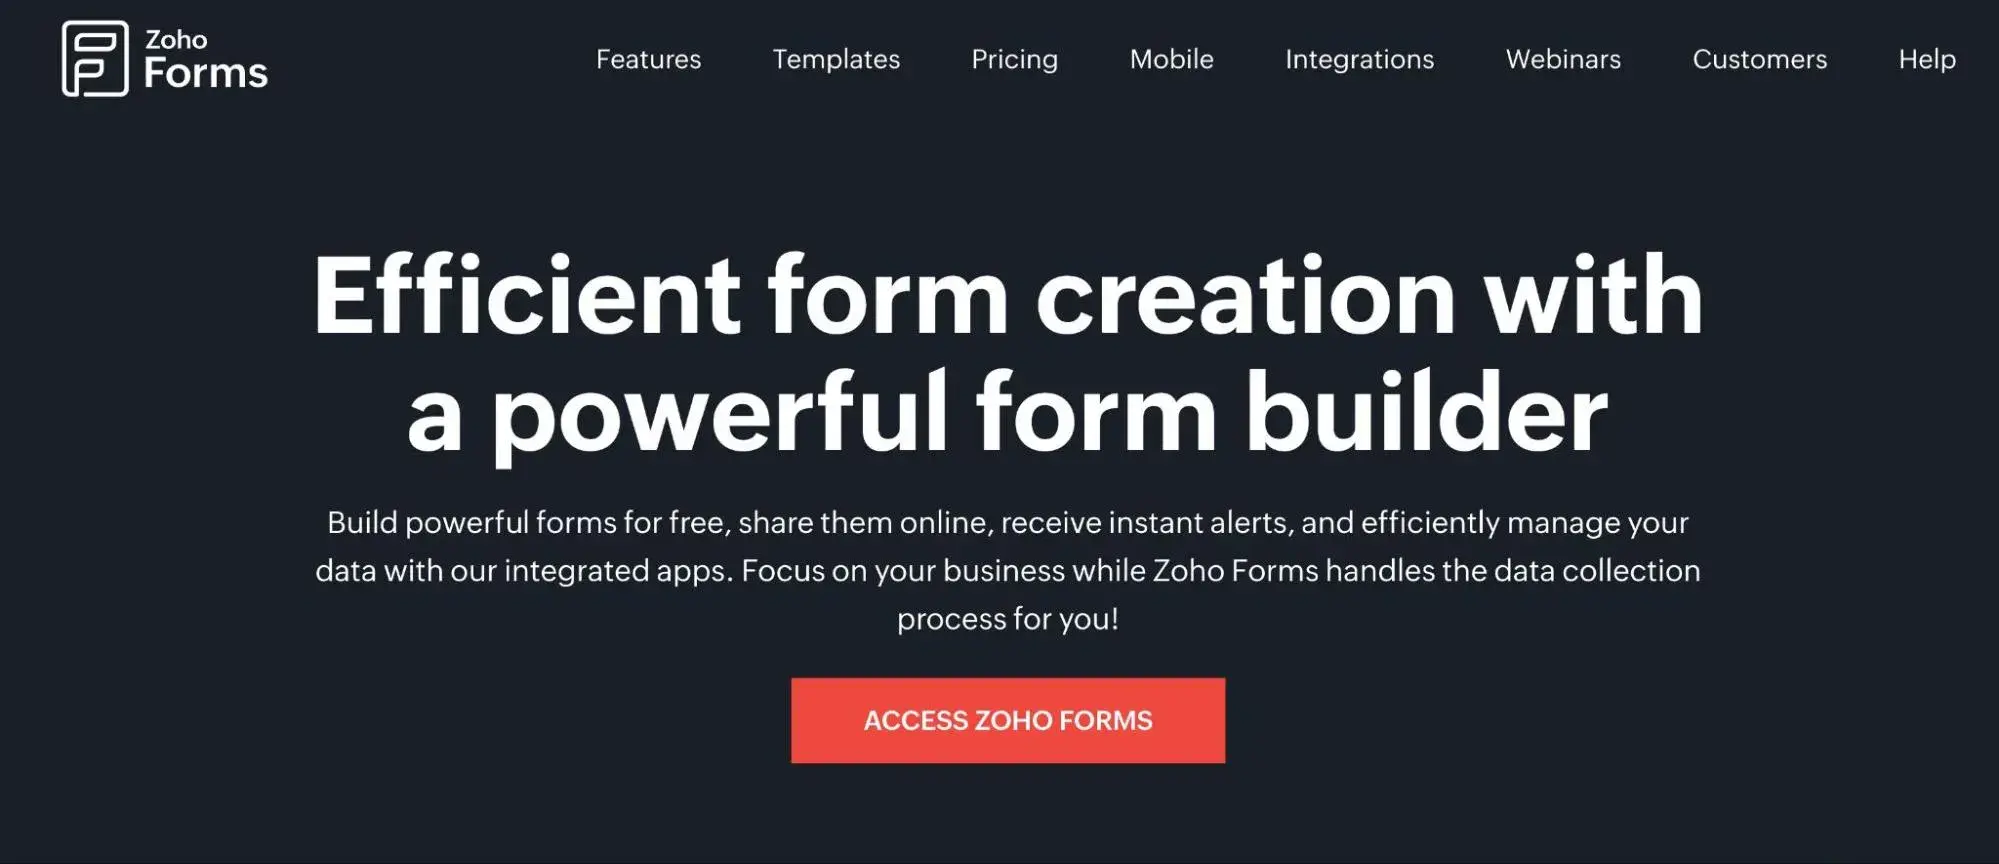 The Zoho Forms homepage